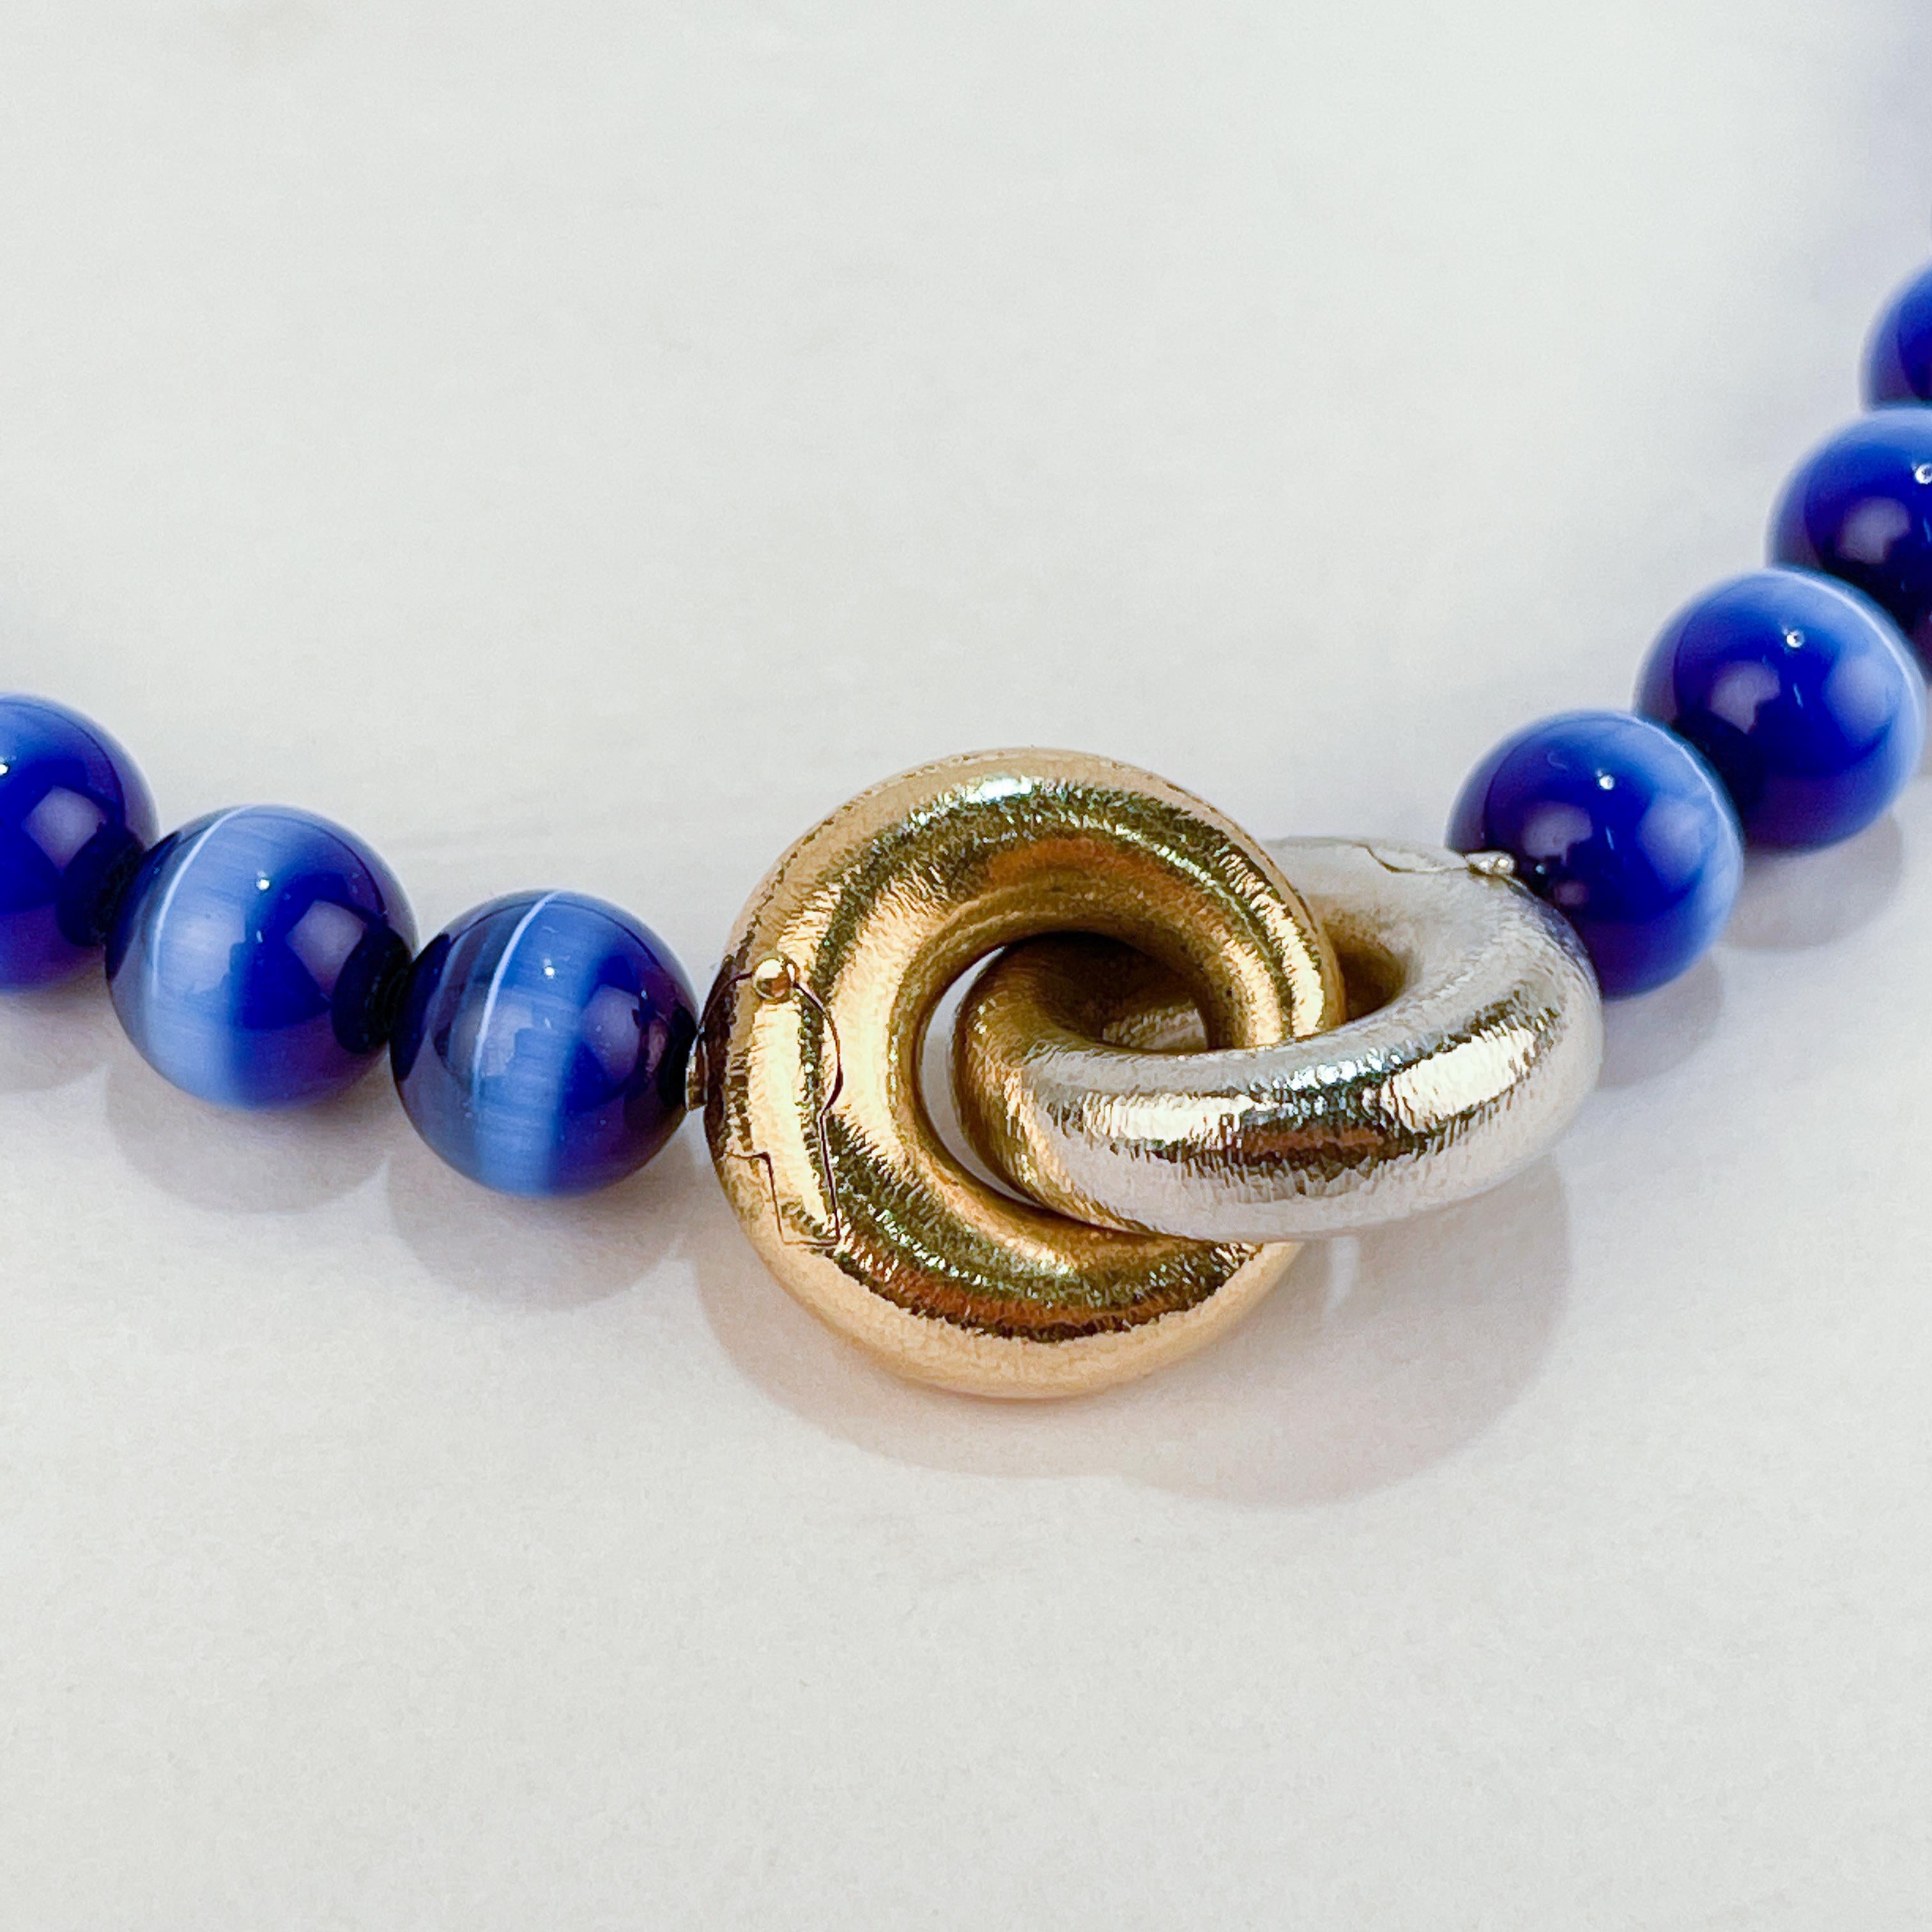 Ole Lynggaard 14k Gold & Blue Tiger's Eye Beaded Collier or Choker Necklace For Sale 4